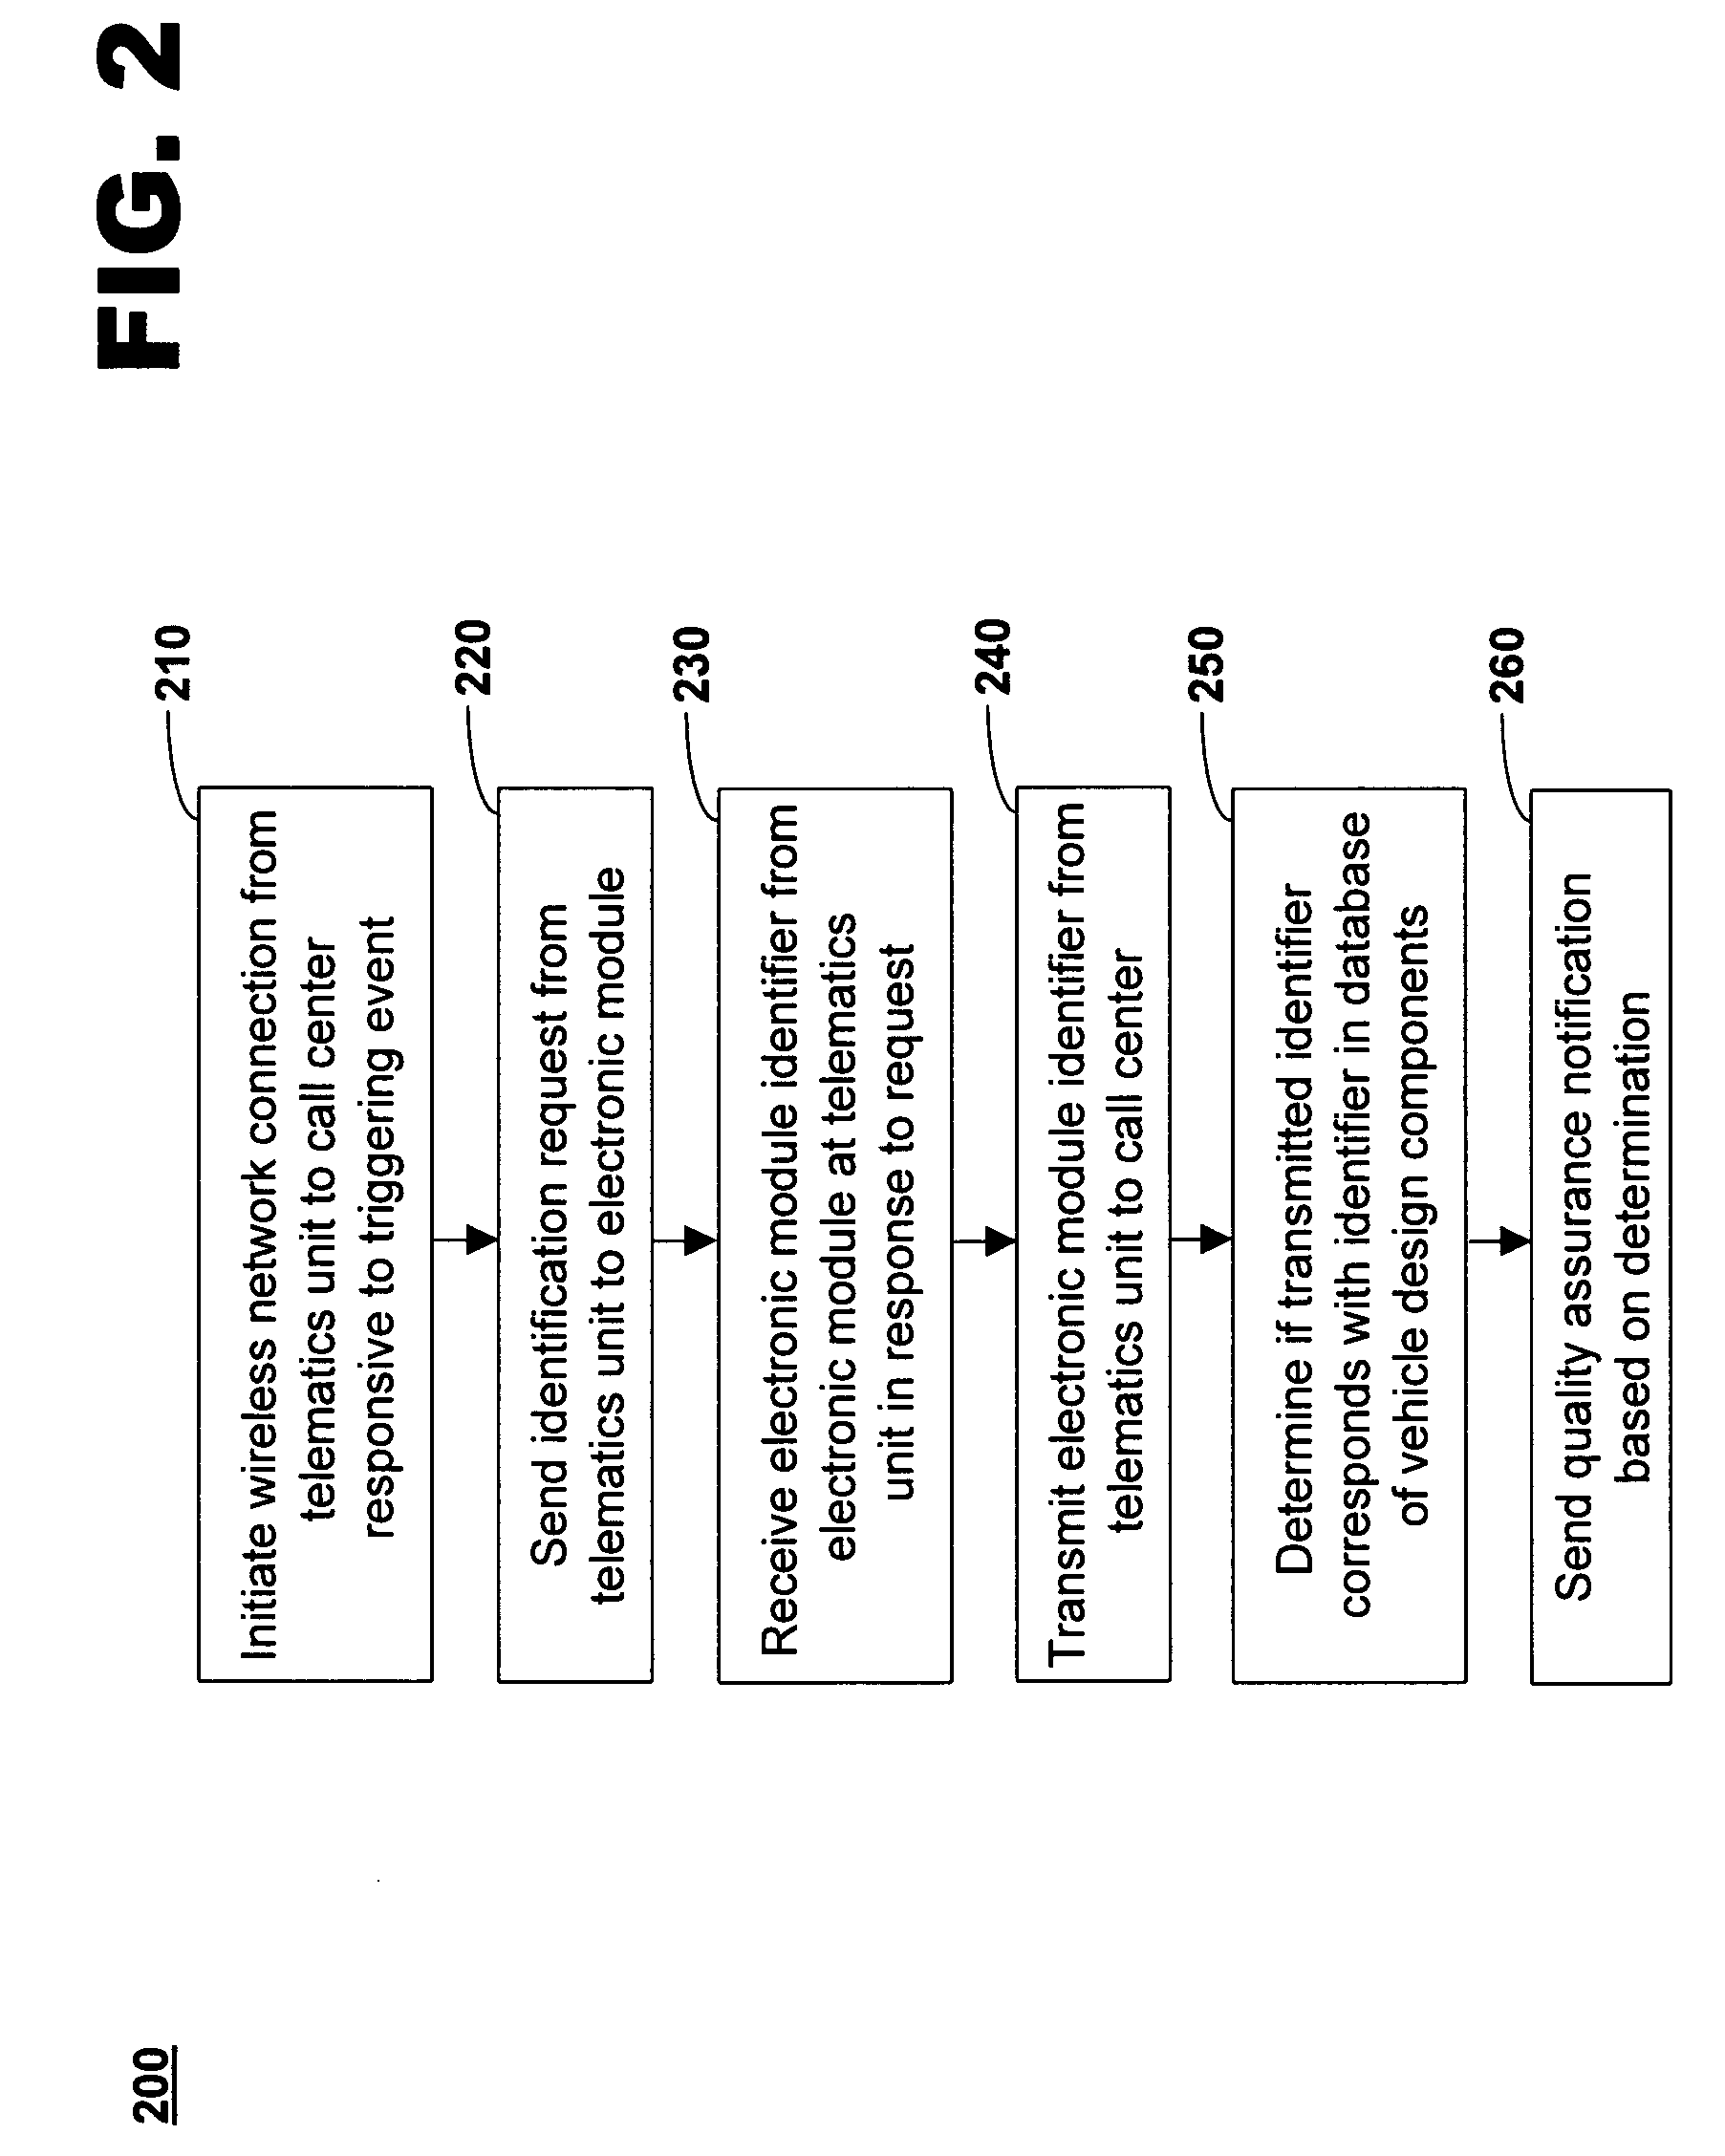 Method and system for remotely inventorying electronic modules installed in a vehicle